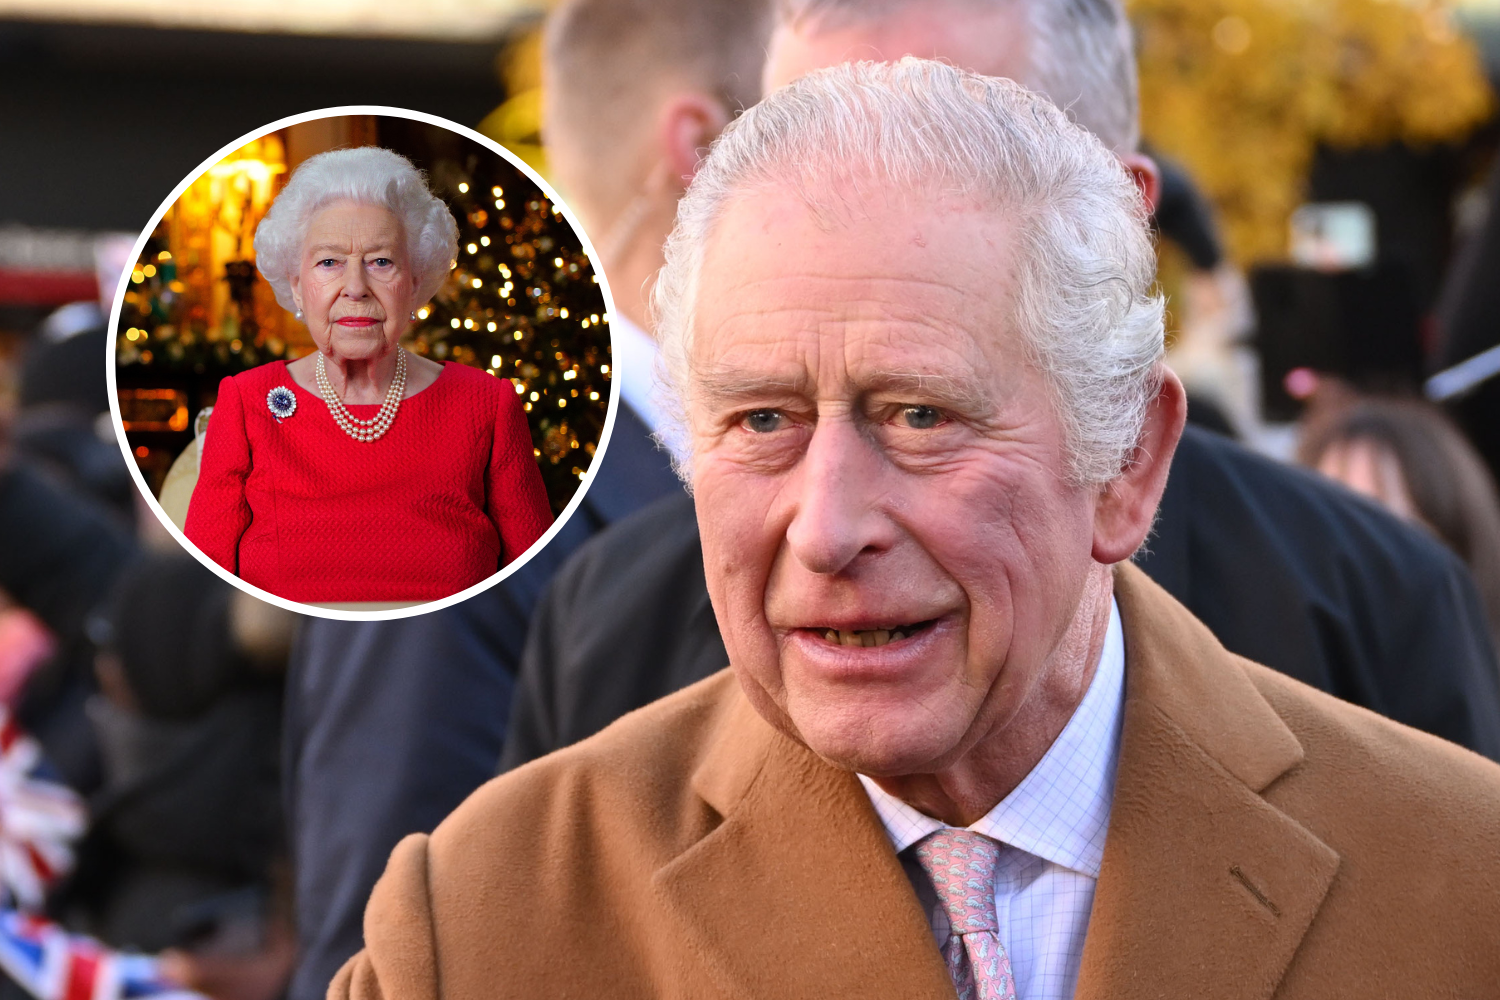 How King Charles' First Christmas Speech Differed from Queen Elizabeth